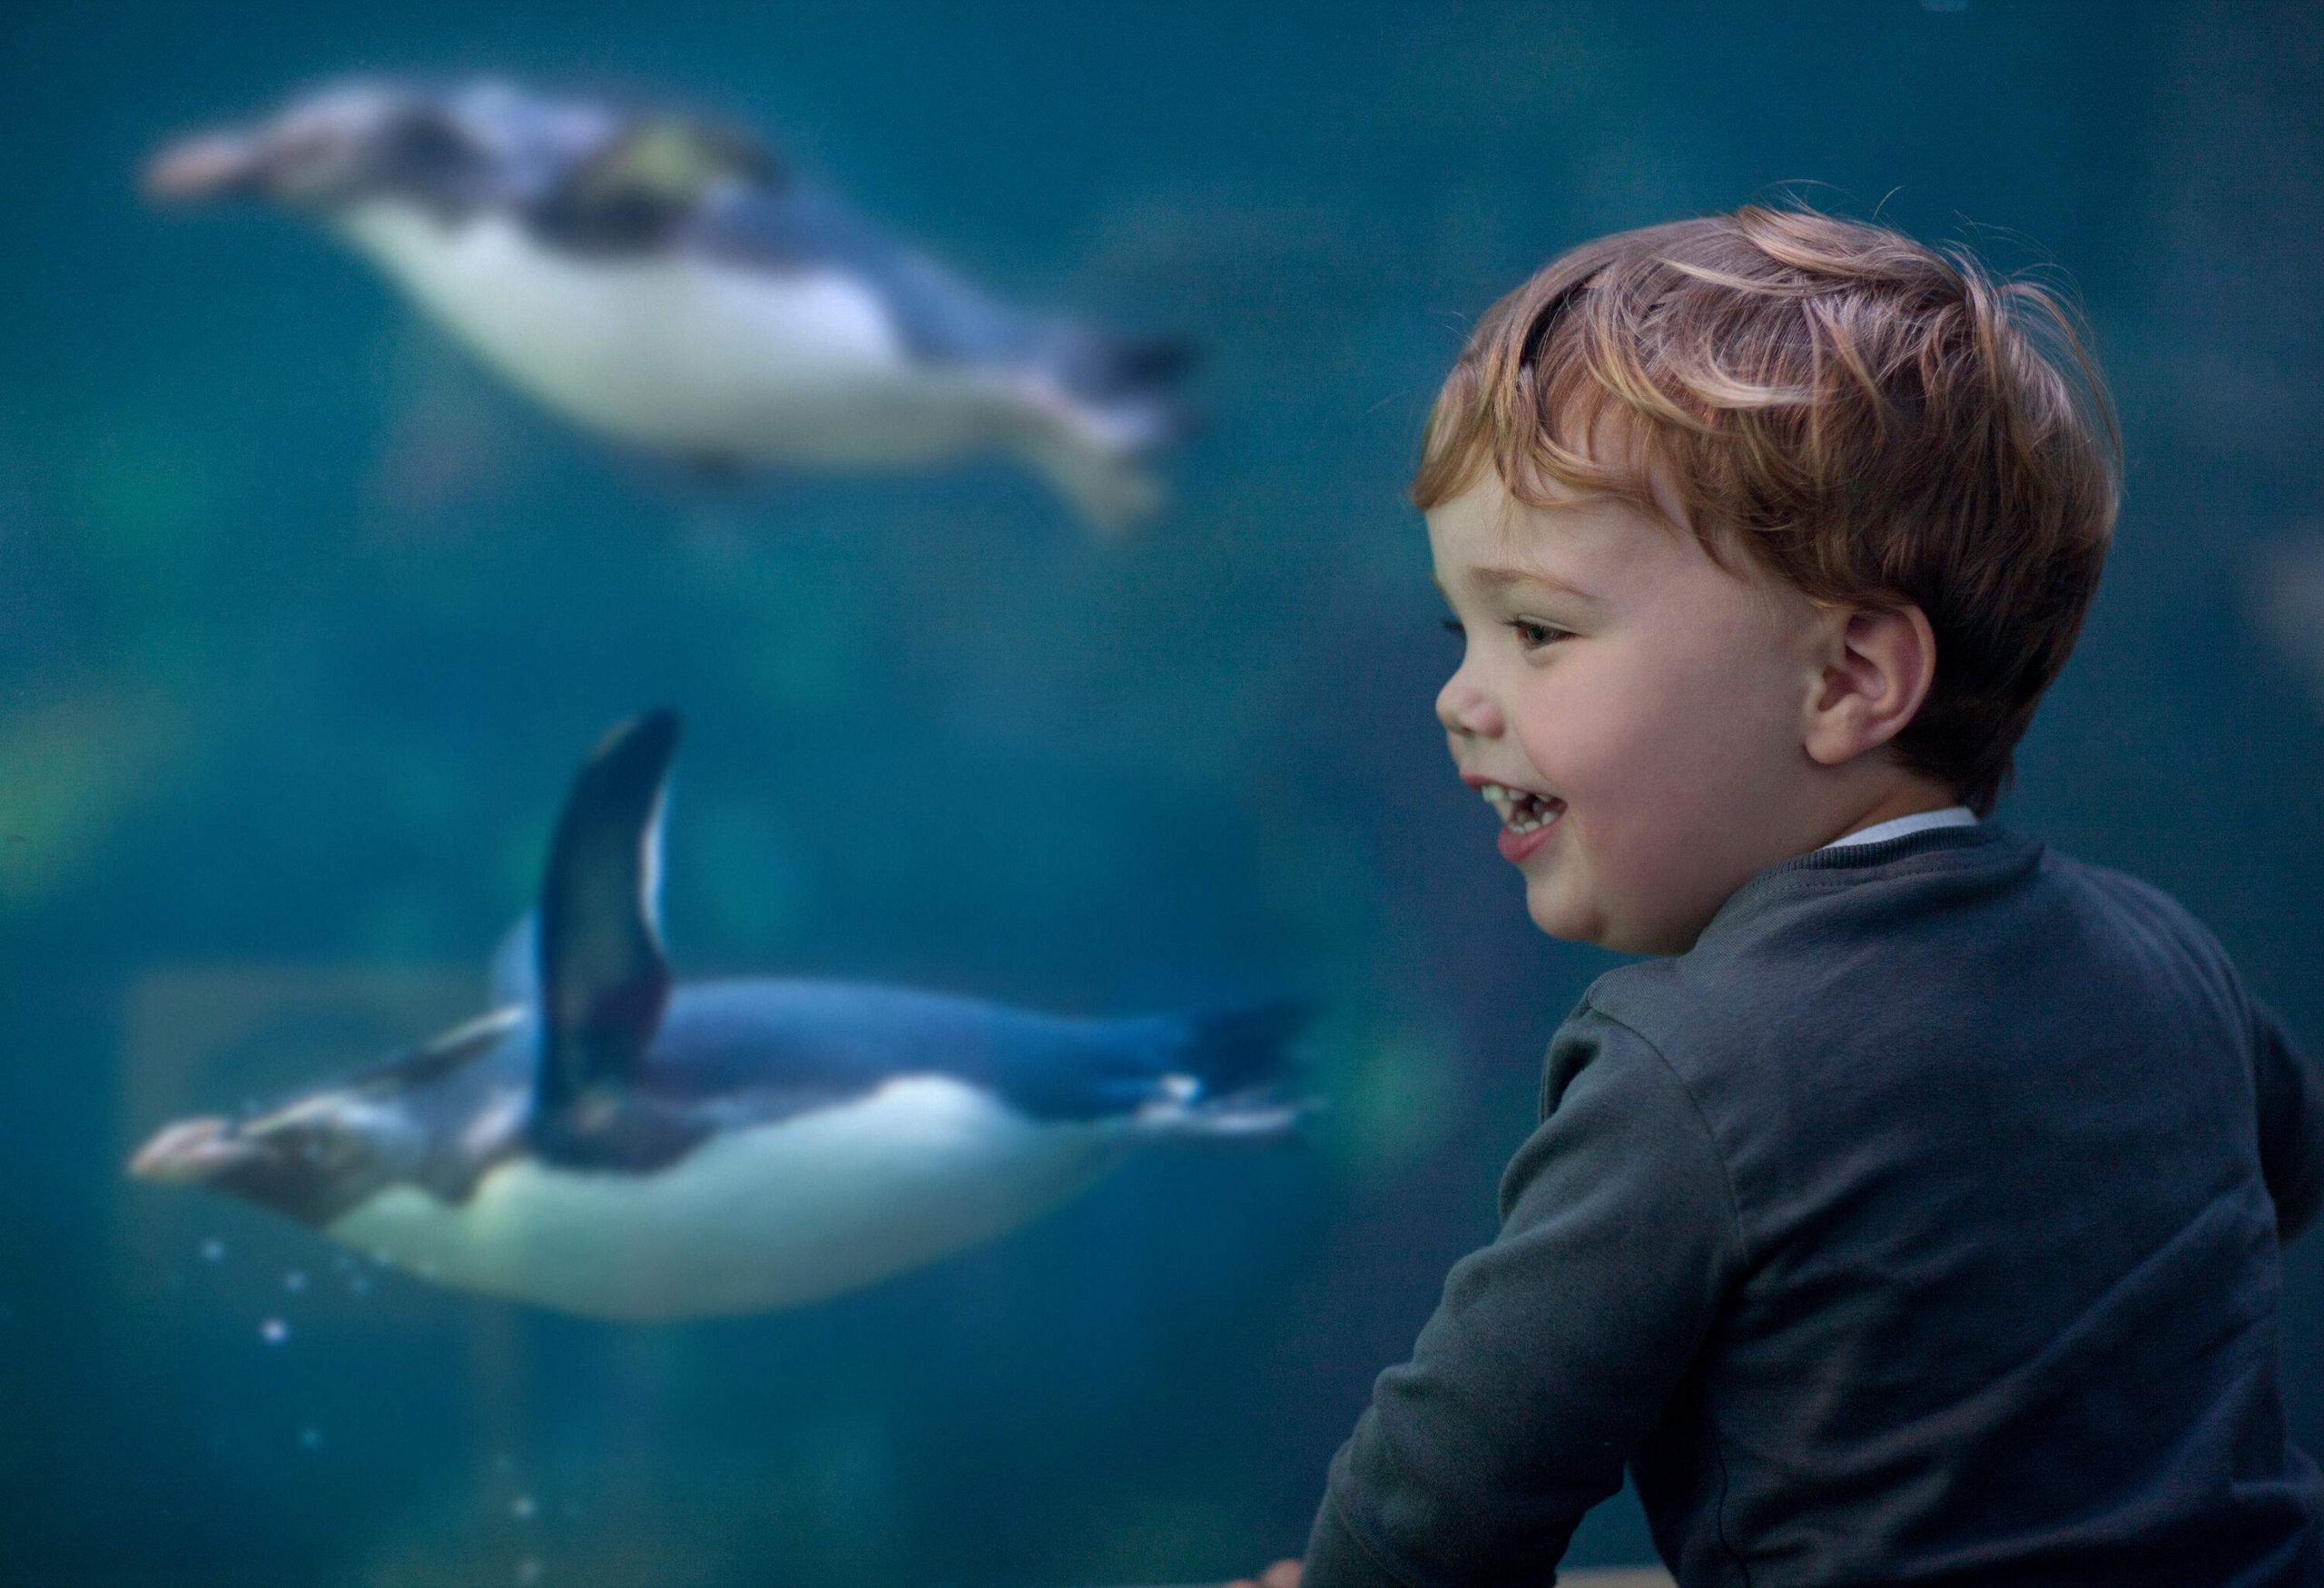 A brunette kid smiles in front of an aquarium with swimming penguins.